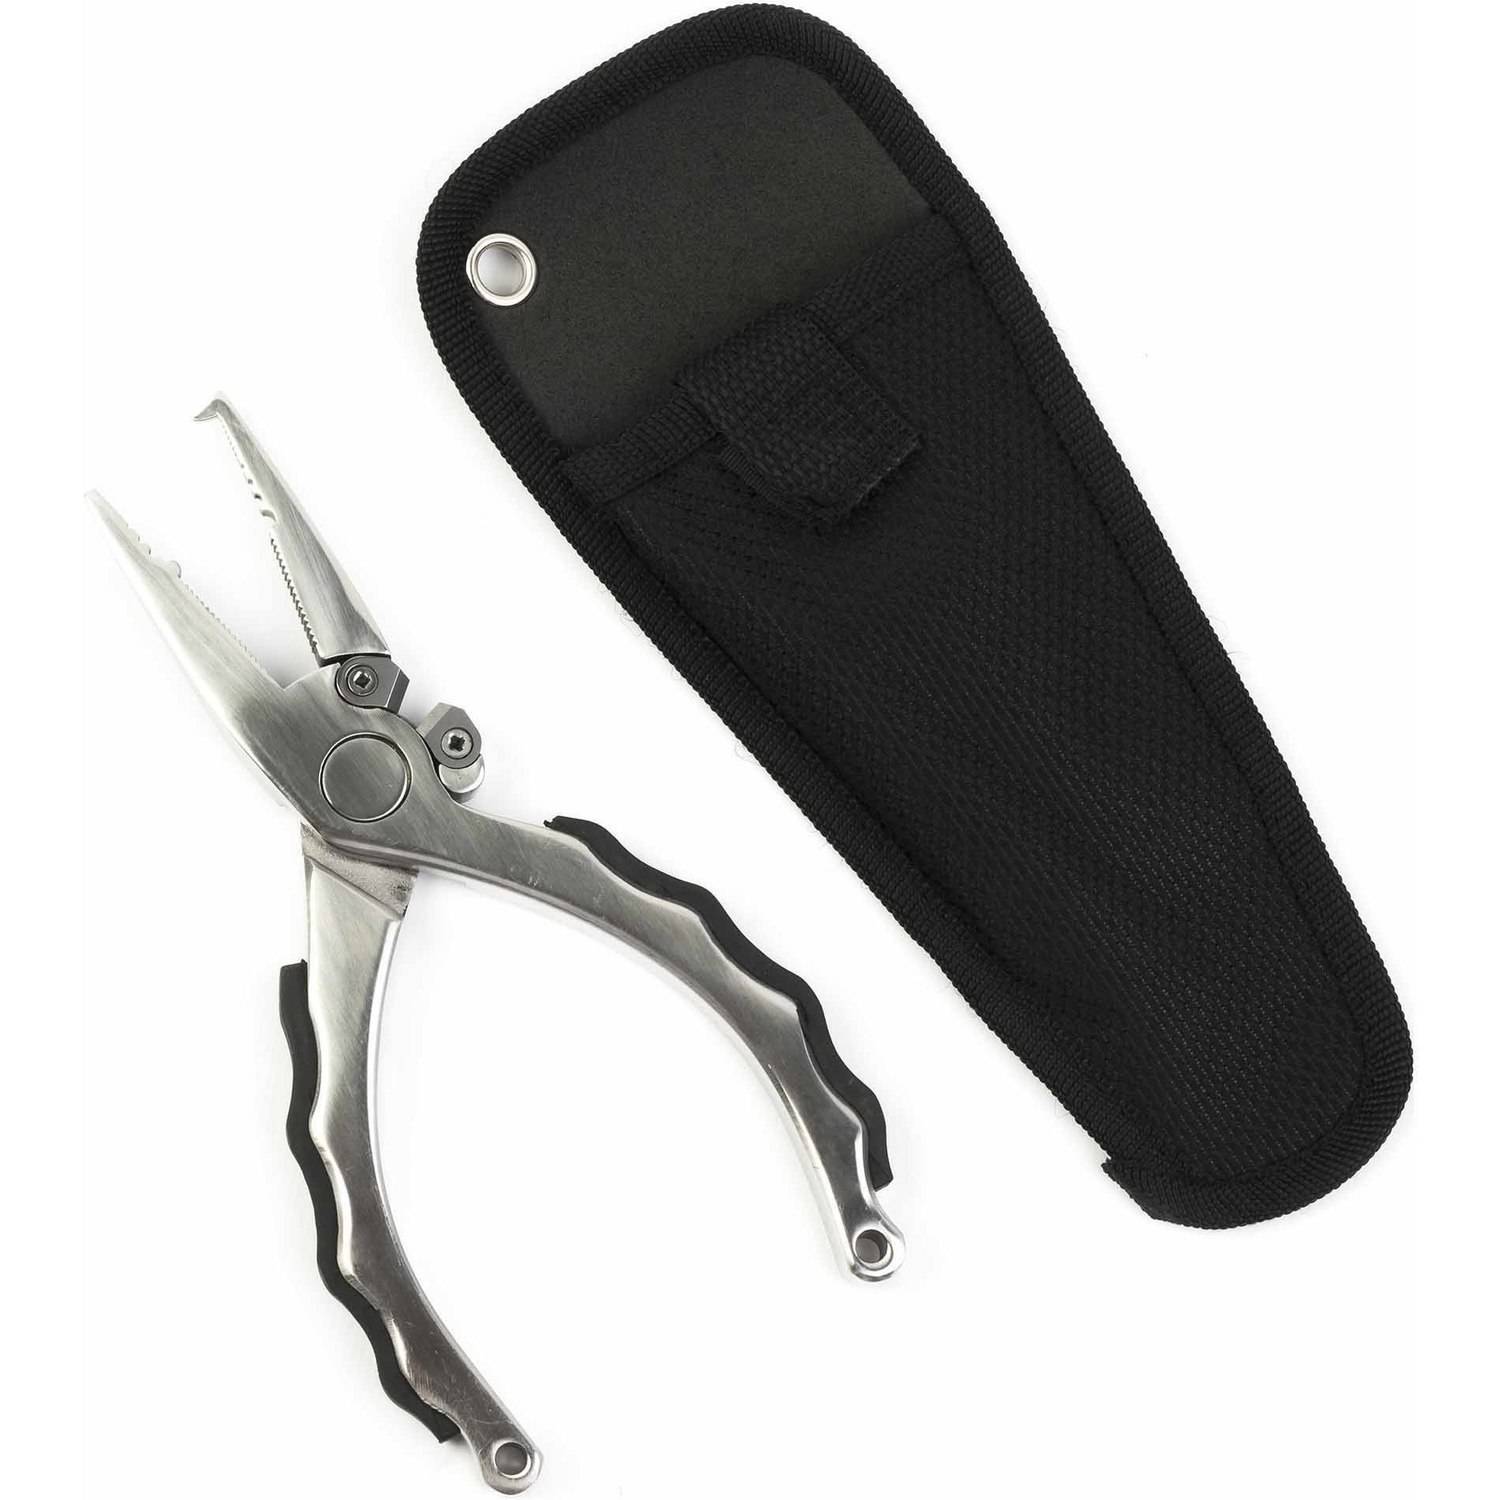 Ozark Trail 8-Inch Stainless Steel Pliers with Sheath - image 1 of 3